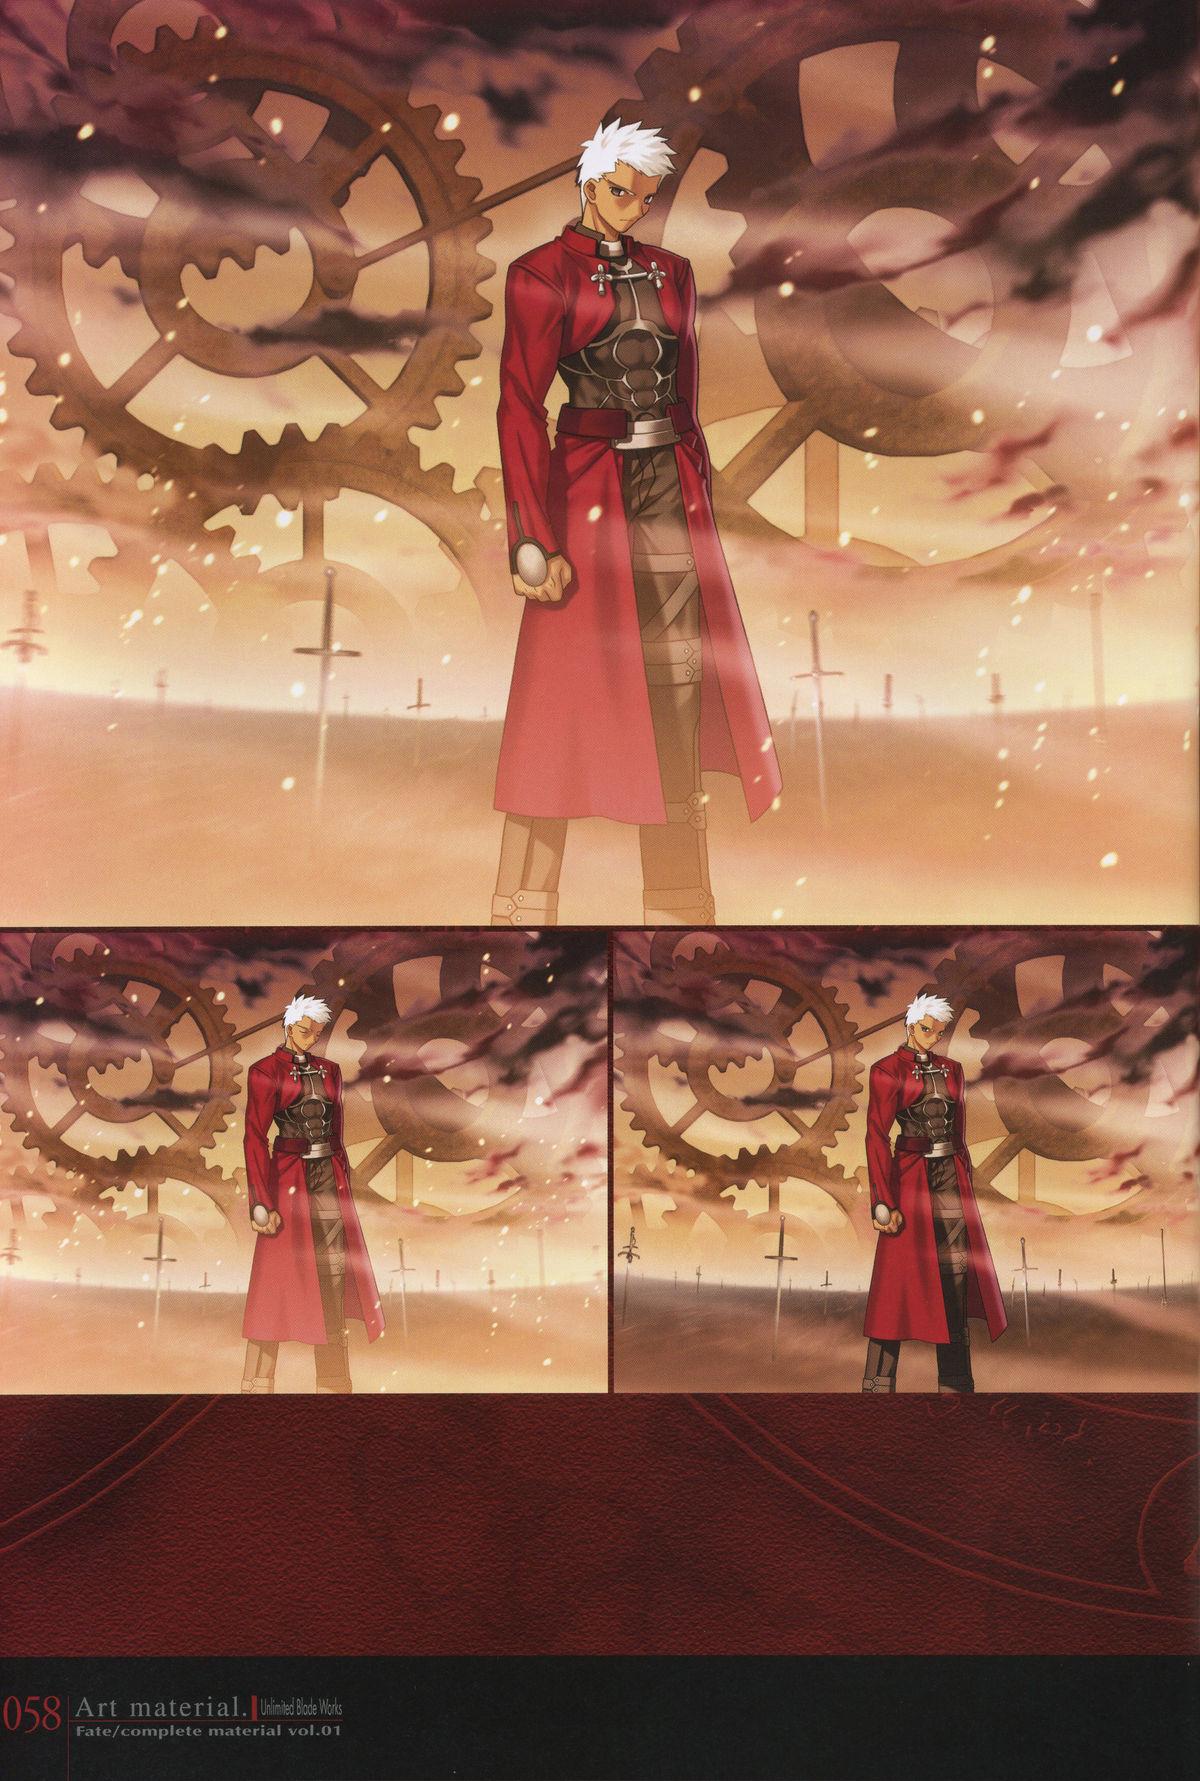 Fate/complete material I - Art material. 62